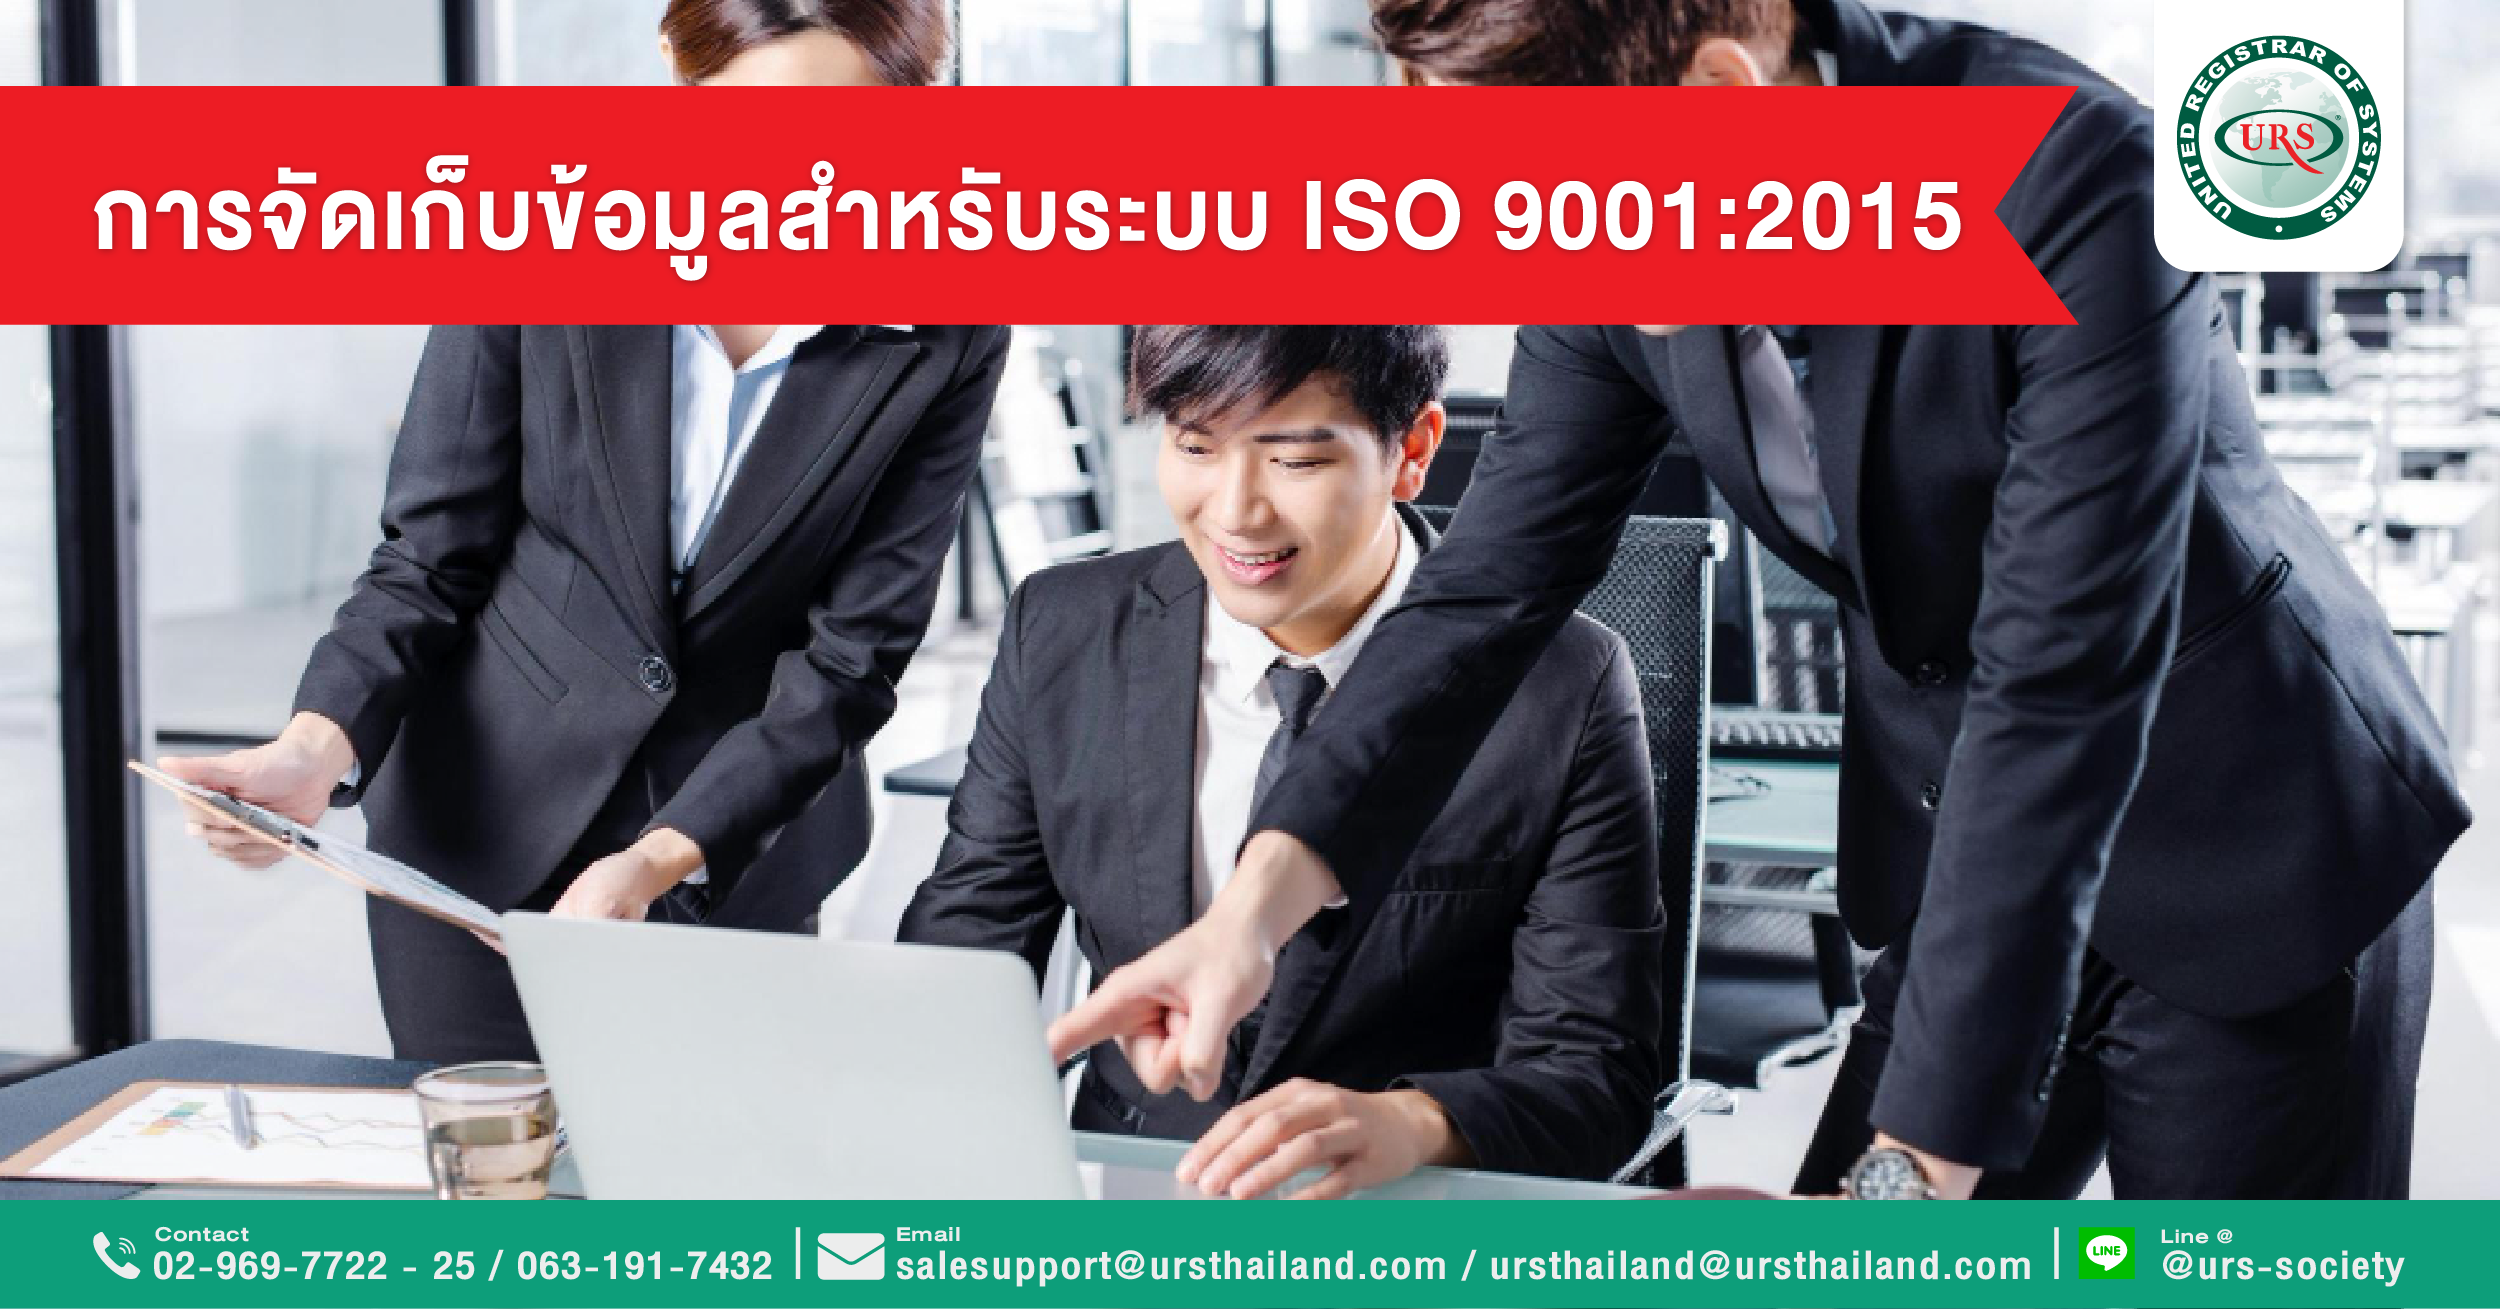 03_Data storage for ISO 90012015 systems-01